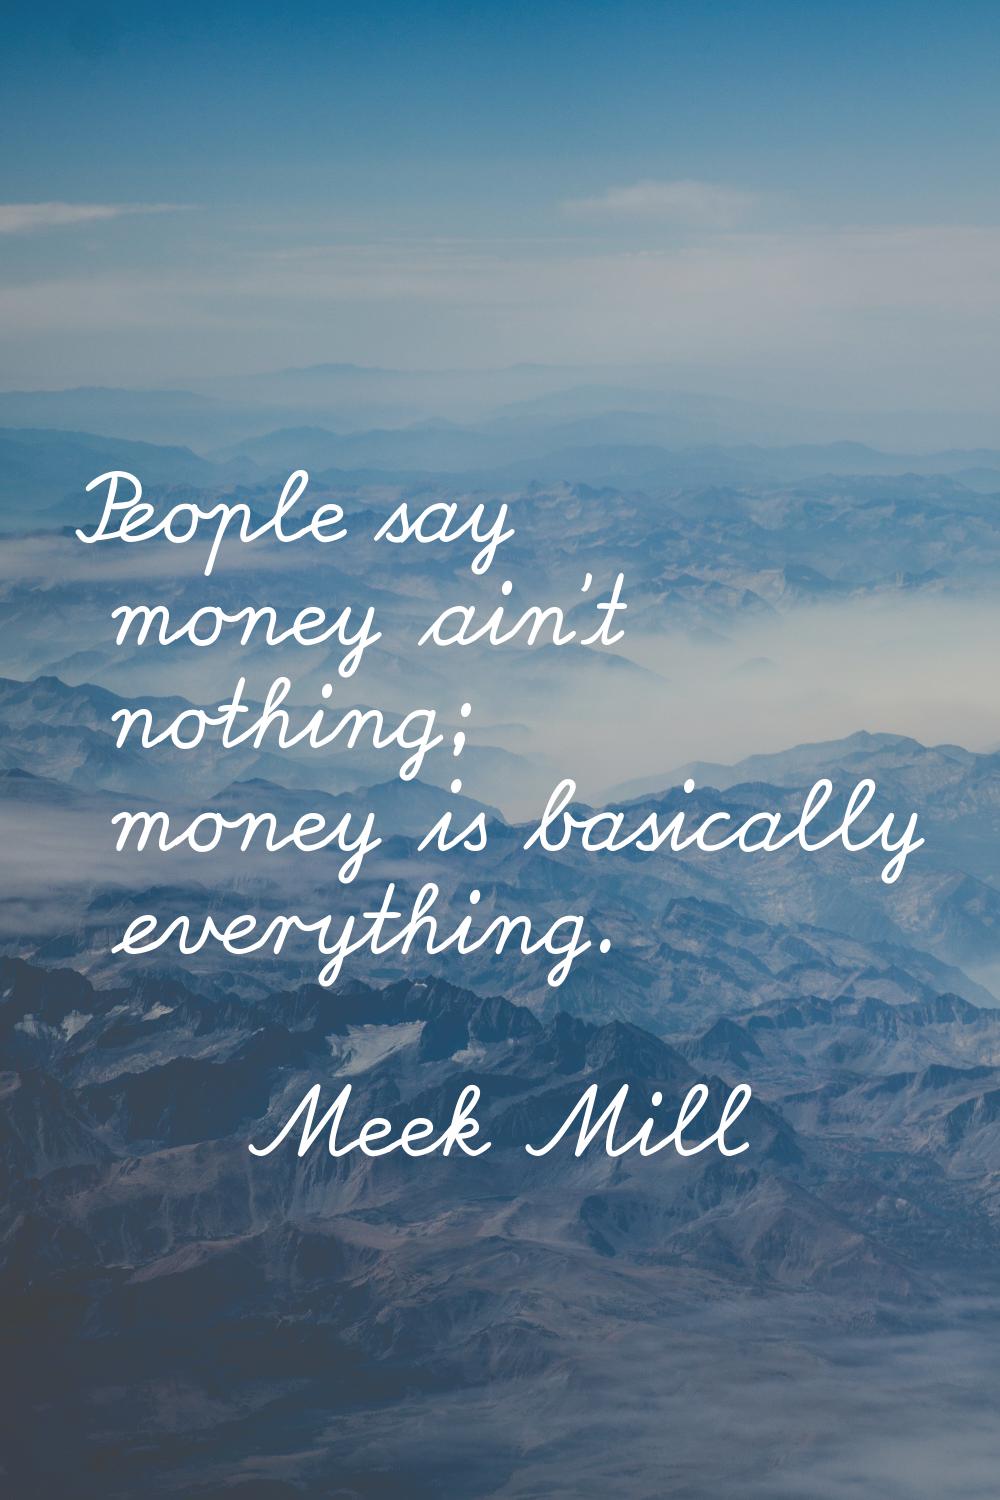 People say money ain't nothing; money is basically everything.